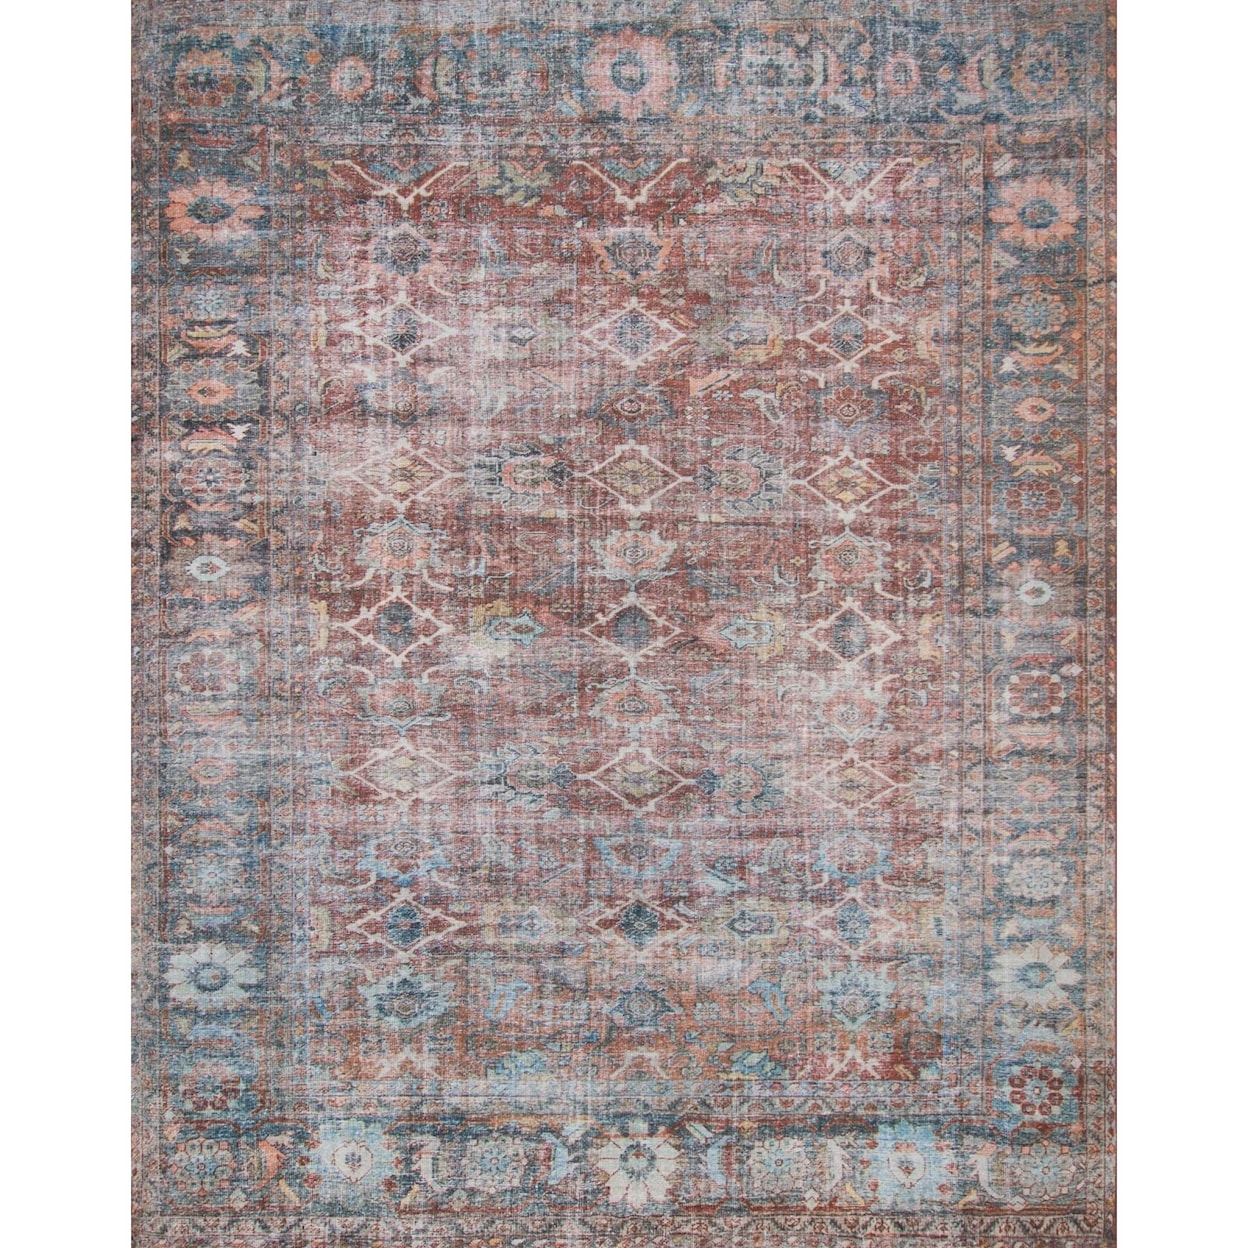 Magnolia Home by Joanna Gaines for Loloi Lucca 1'-6" x 1'-6" Square Rug